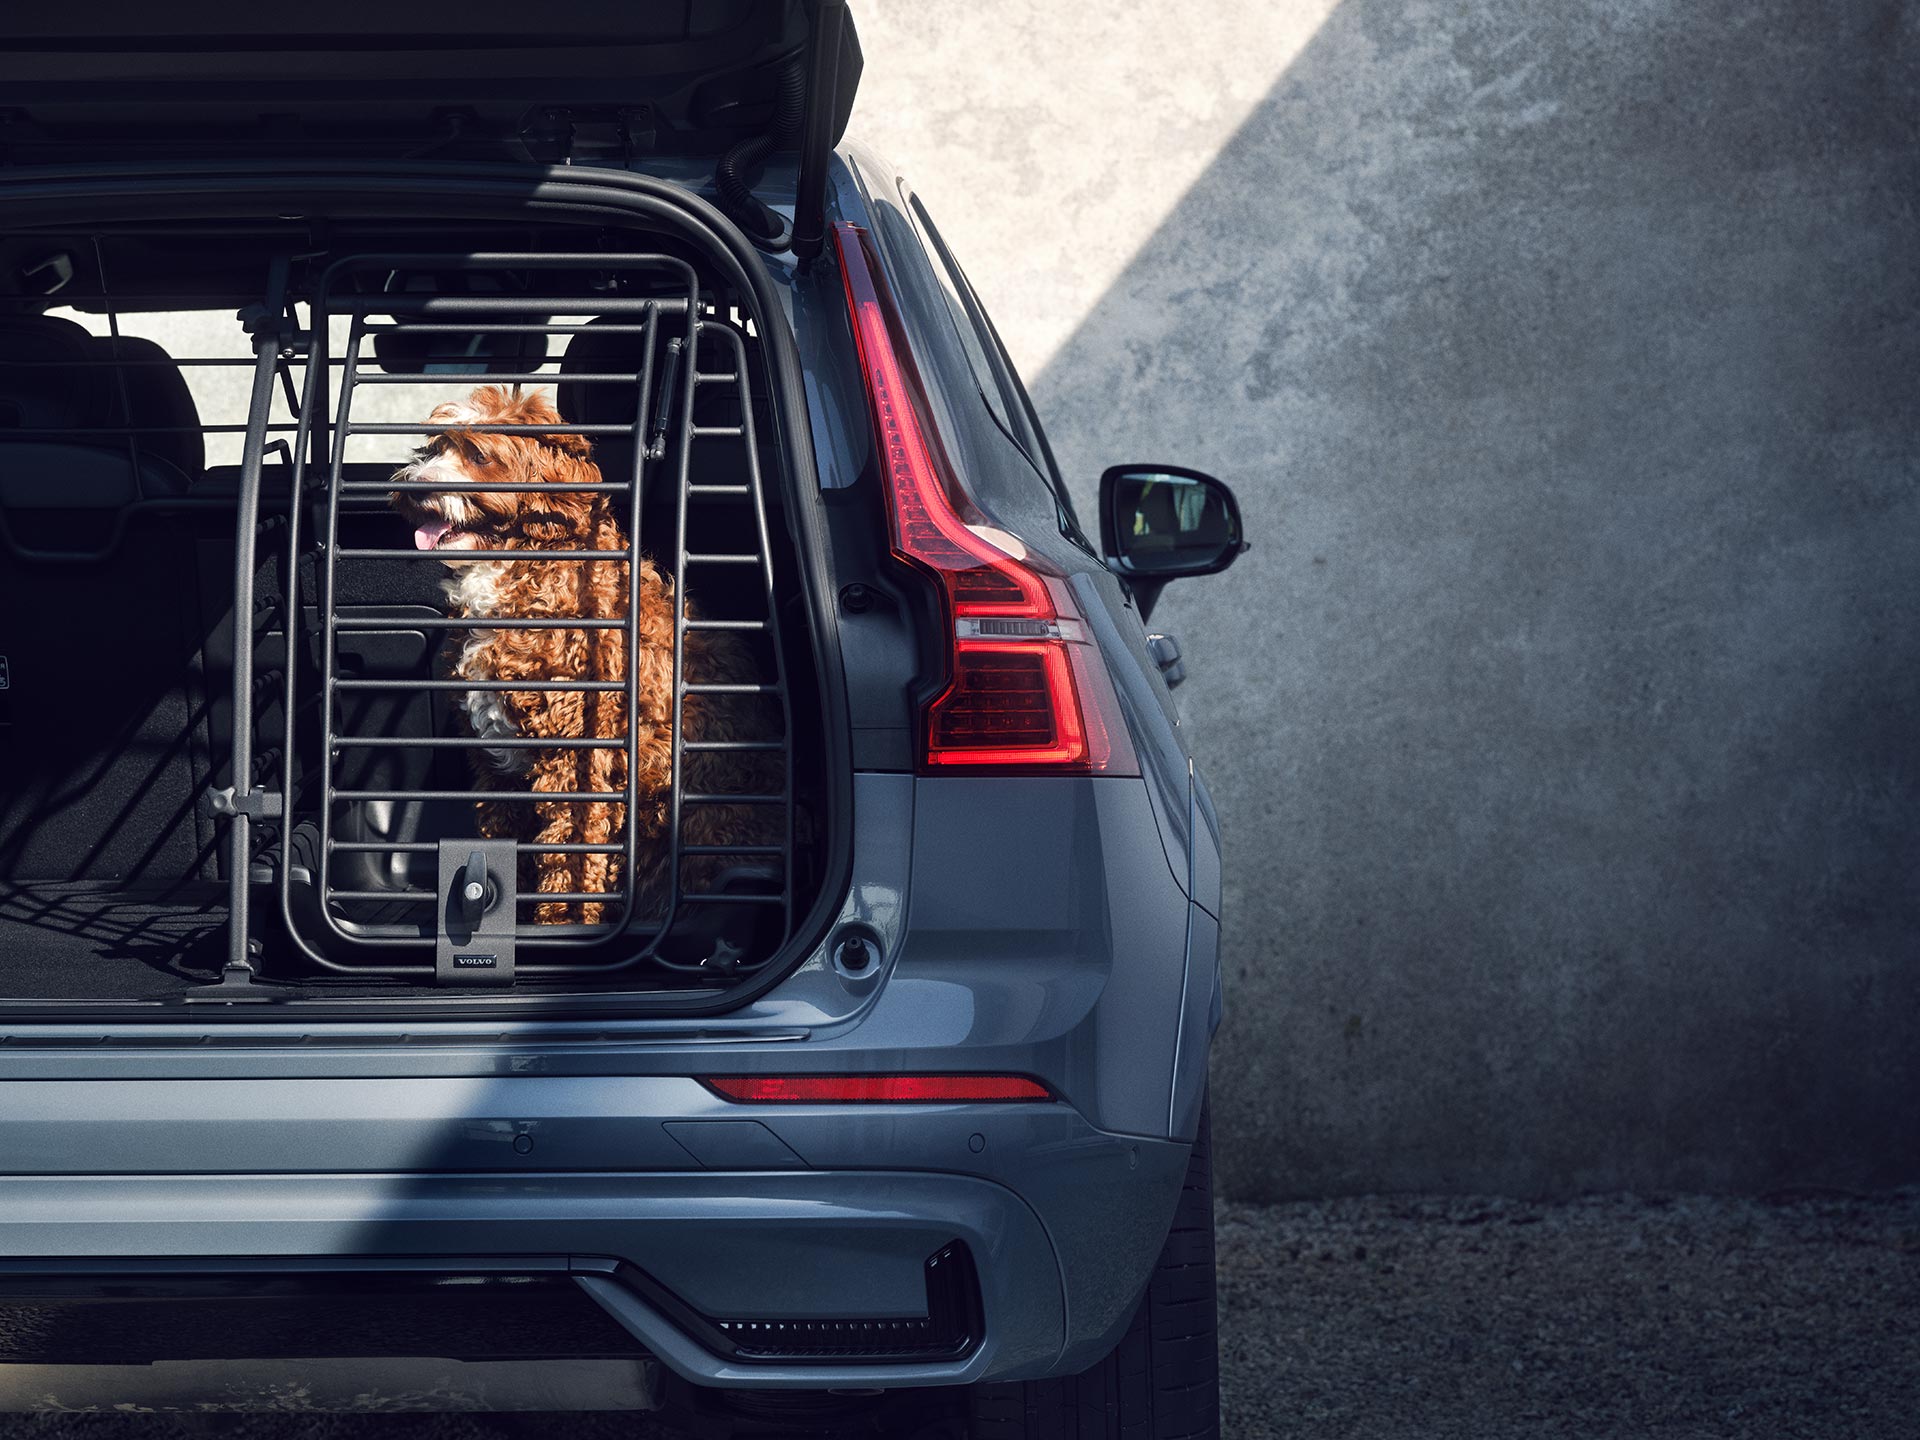 A copper-coloured dog sits in a secure dog cage, an accessory specifically designed for the safety and comfort of pets travelling in Volvo cars.